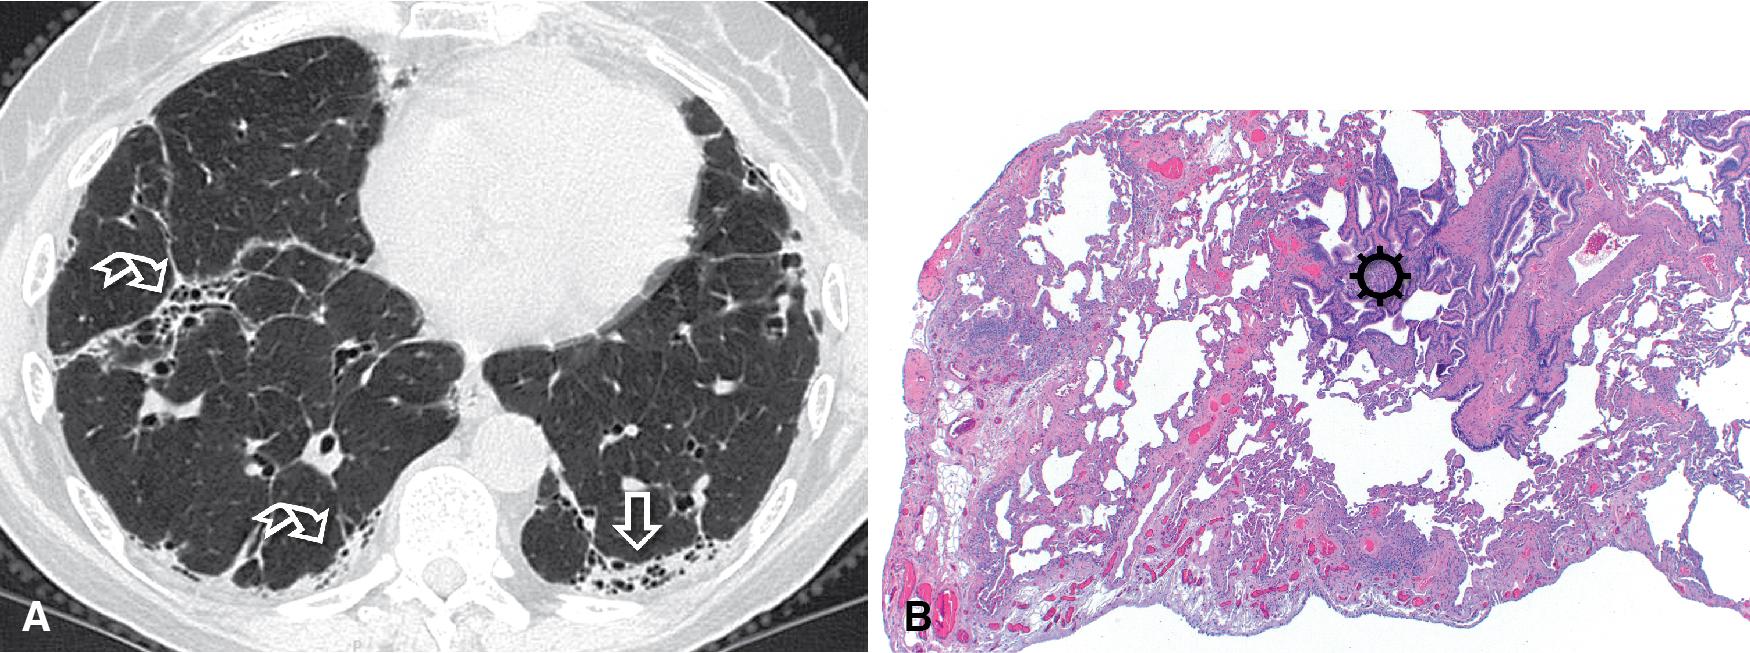 Figure 4.53, Fibrotic hypersensitivity pneumonitis (HP). (A) High-resolution computed tomography shows patchy areas of subpleural fibrosis (curved arrows) including honeycombing (arrow) with lower zone distribution. This aspect is indistinguishable from a usual interstitial pneumonia (UIP) pattern of fibrosis in patients with idiopathic pulmonary fibrosis. (B) Predominantly subpleural fibrosis: prominent peribronchiolar metaplasia is readily apparent at low power (sun) .